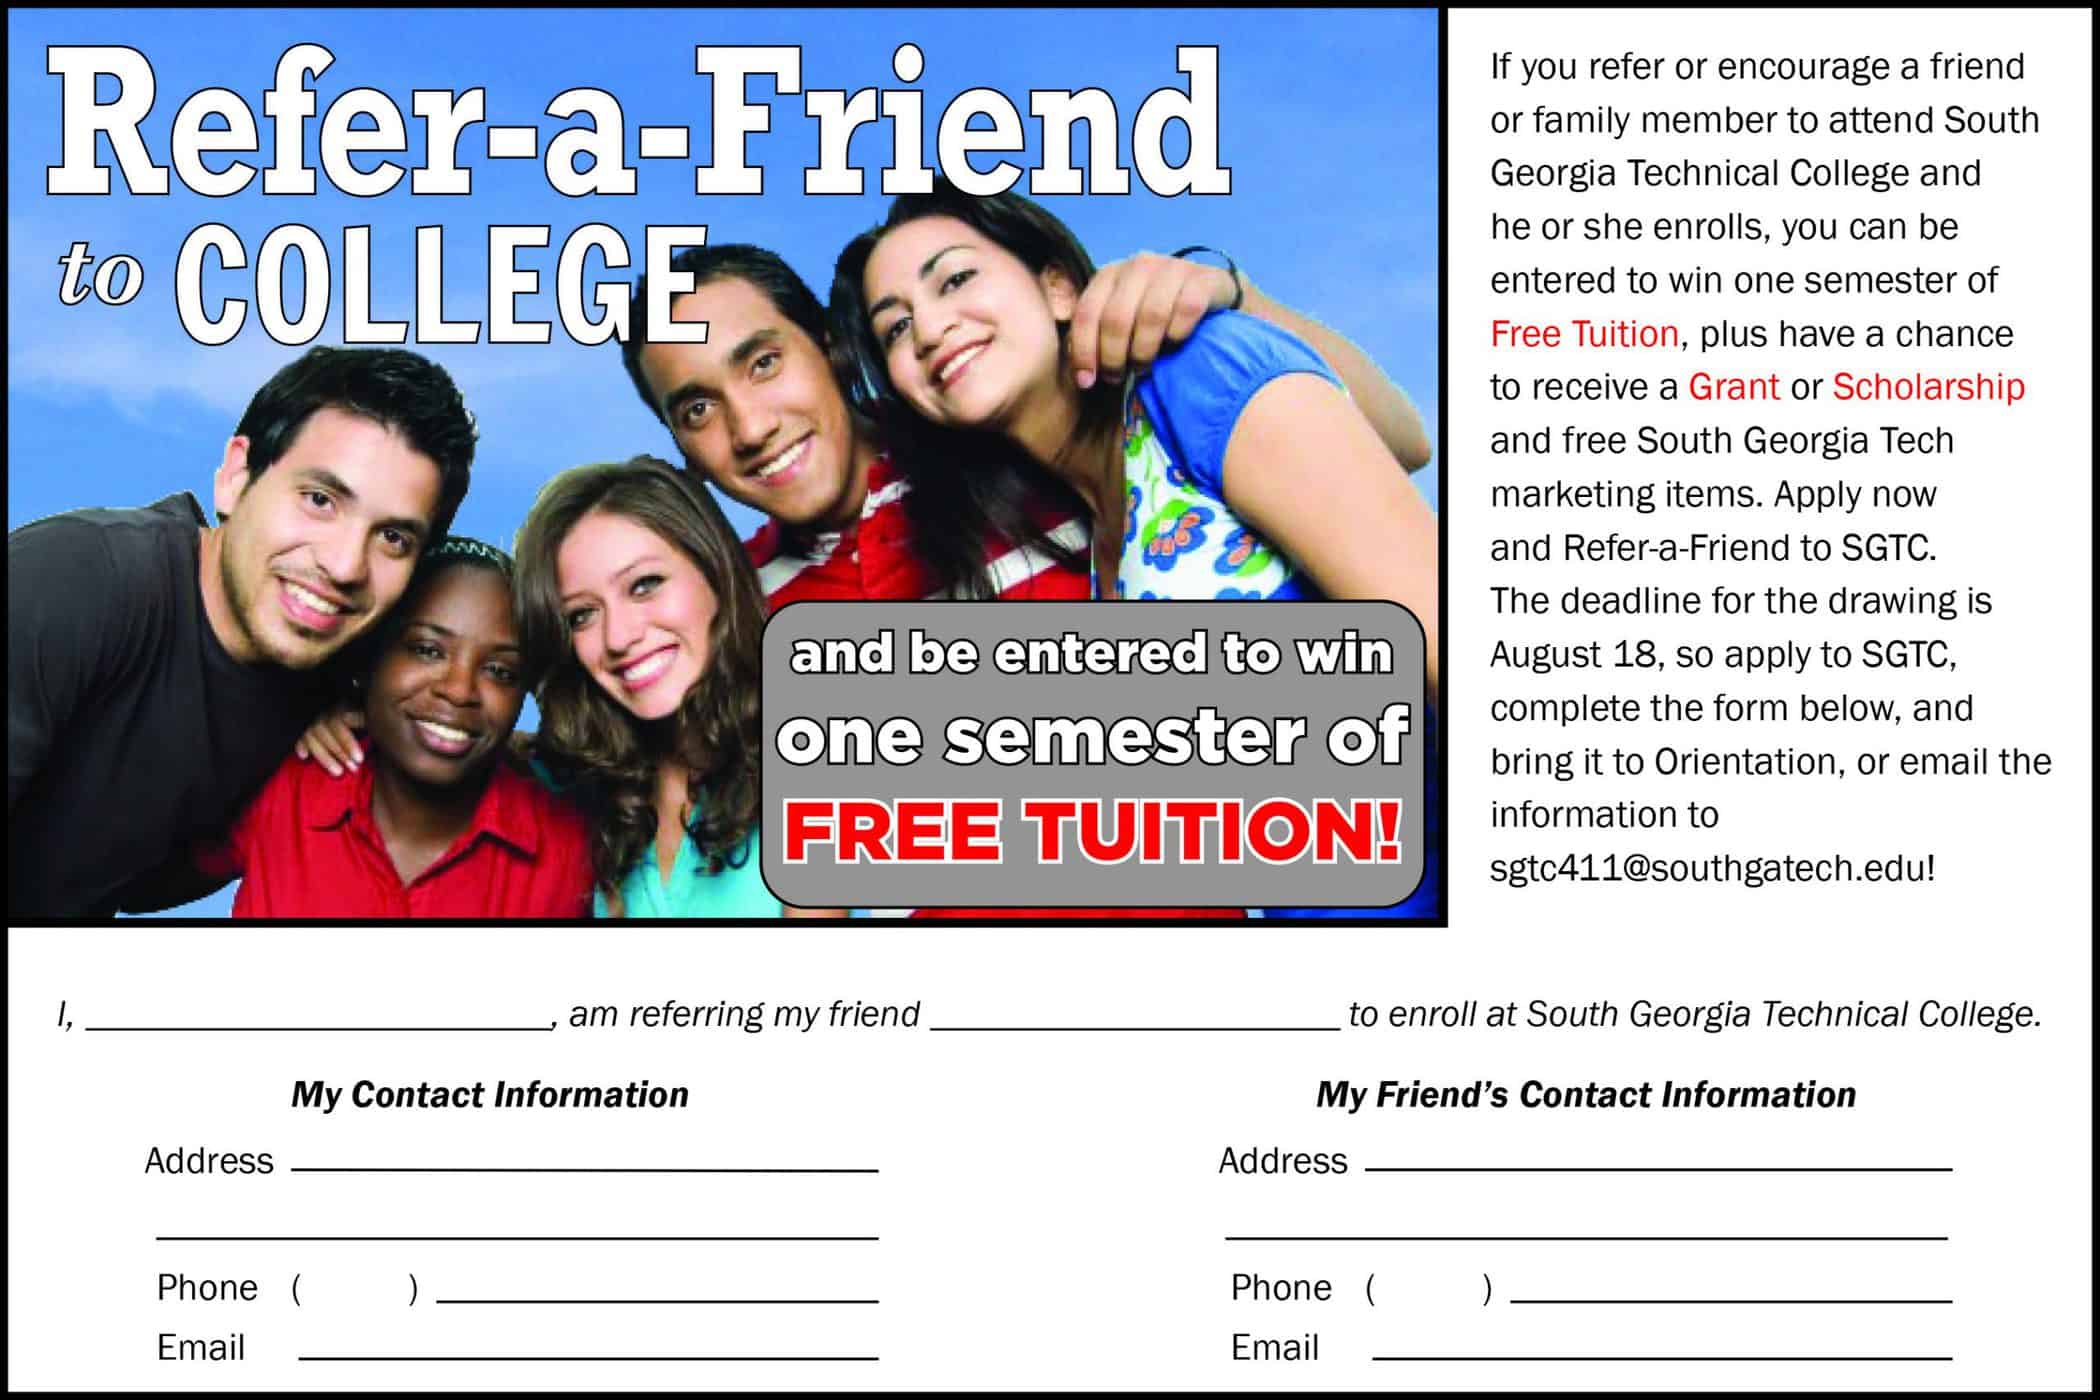 Take advantage of the Refer-a-Friend opportunity at South Georgia Technical College to be entered to win one semester of FREE Tuition. Email sgtc411@southgatech.edu for more information.